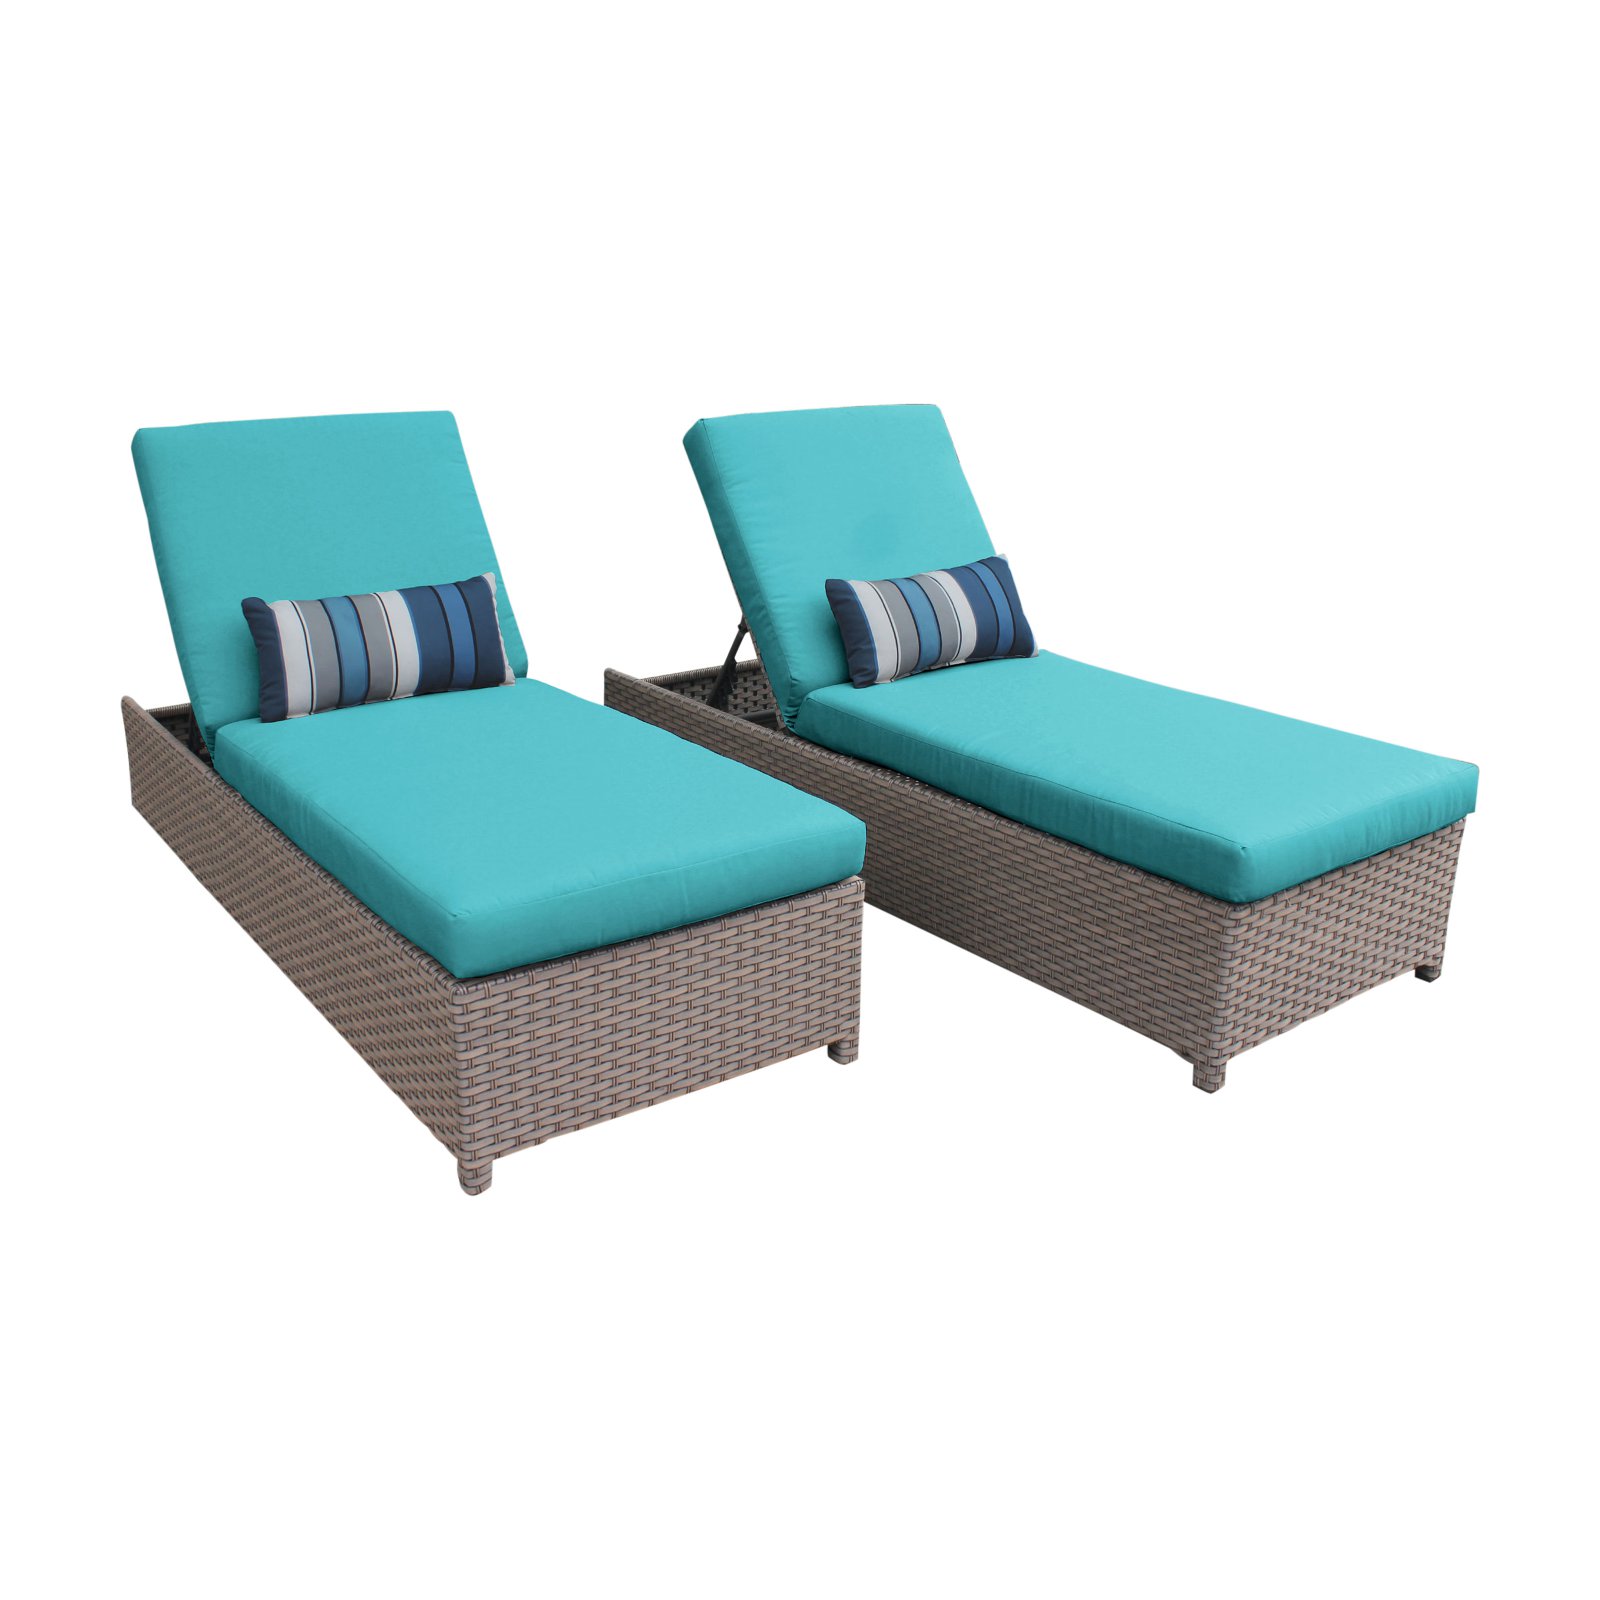 TK Classics Monterey Wheeled Wicker Outdoor Chaise Lounge Chair - Set of 2 - image 2 of 11